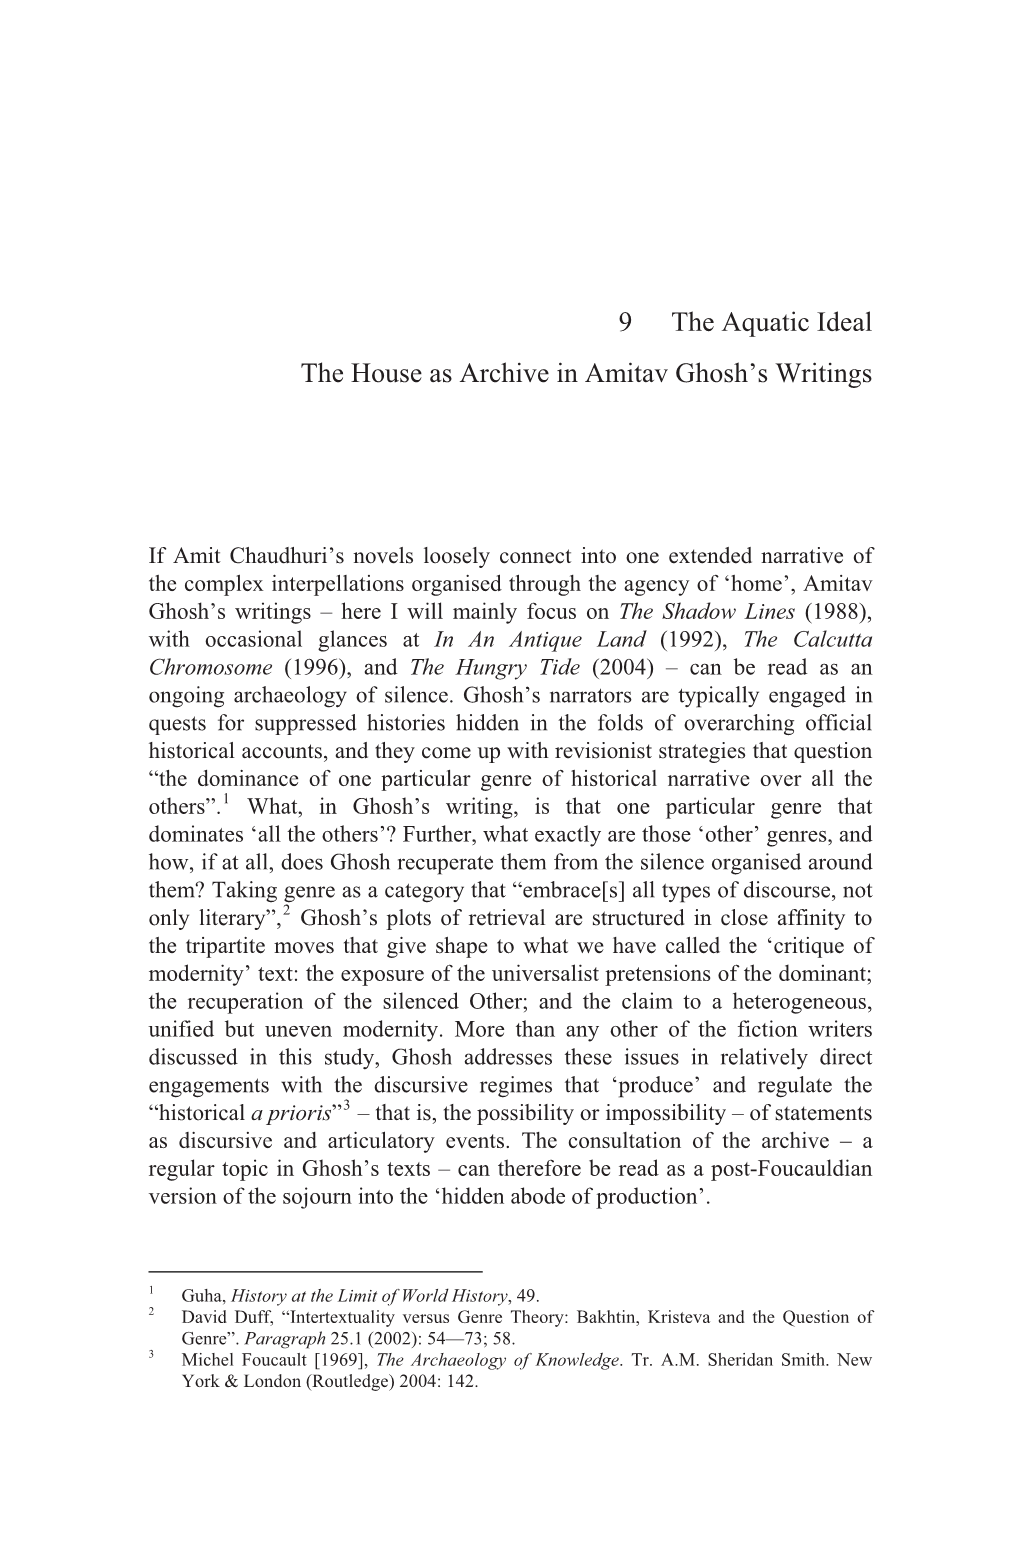 9 the Aquatic Ideal the House As Archive in Amitav Ghosh's Writings